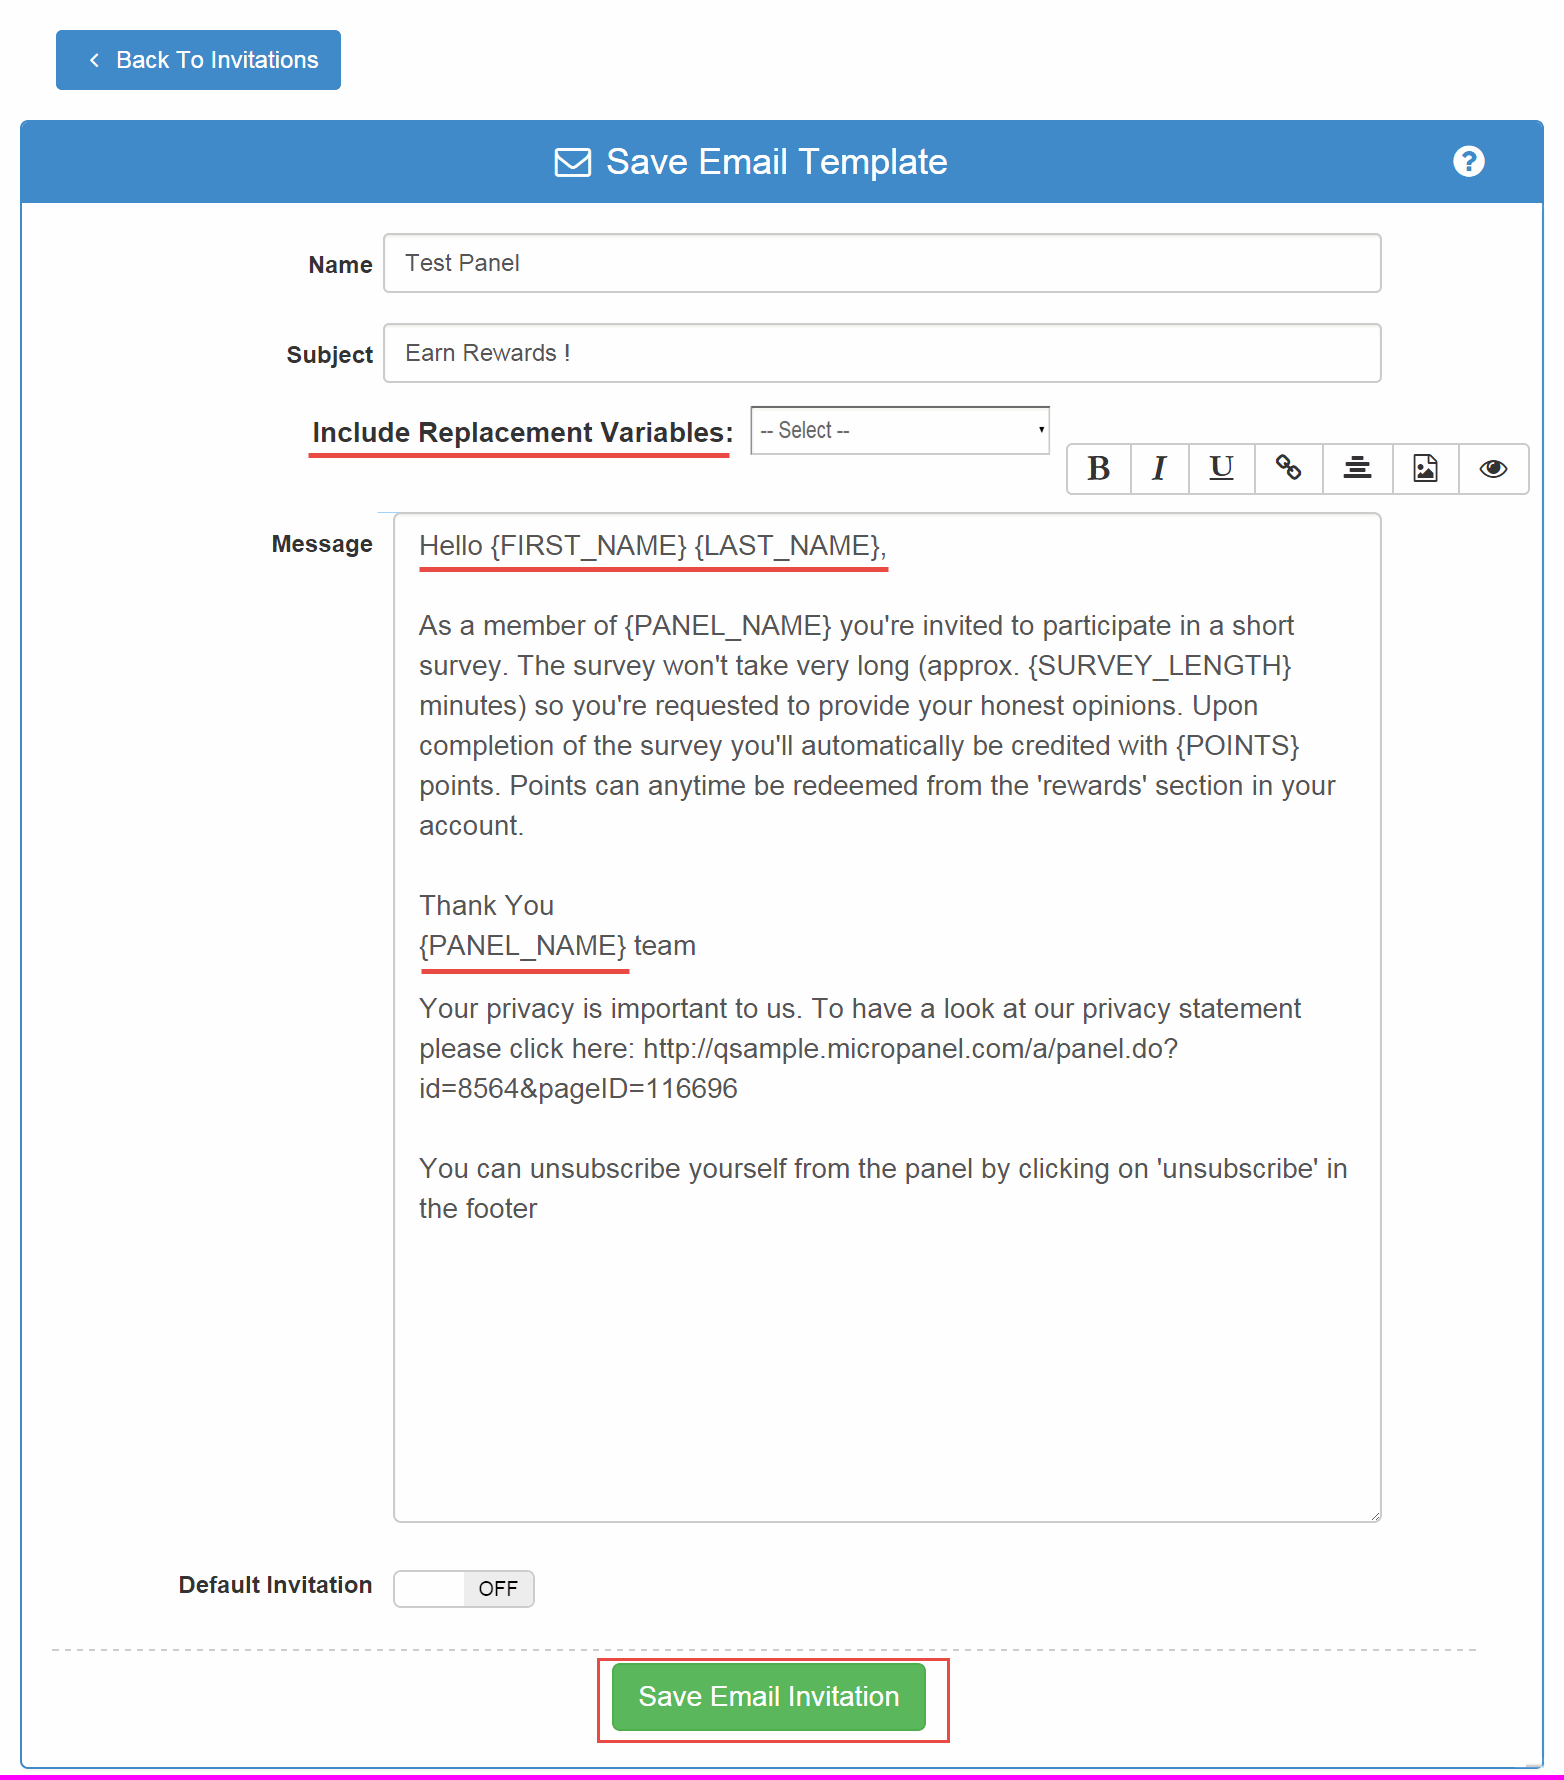 Global Email Invitation Templates For Panels Surveyanalytics Online for dimensions 1564 X 1780